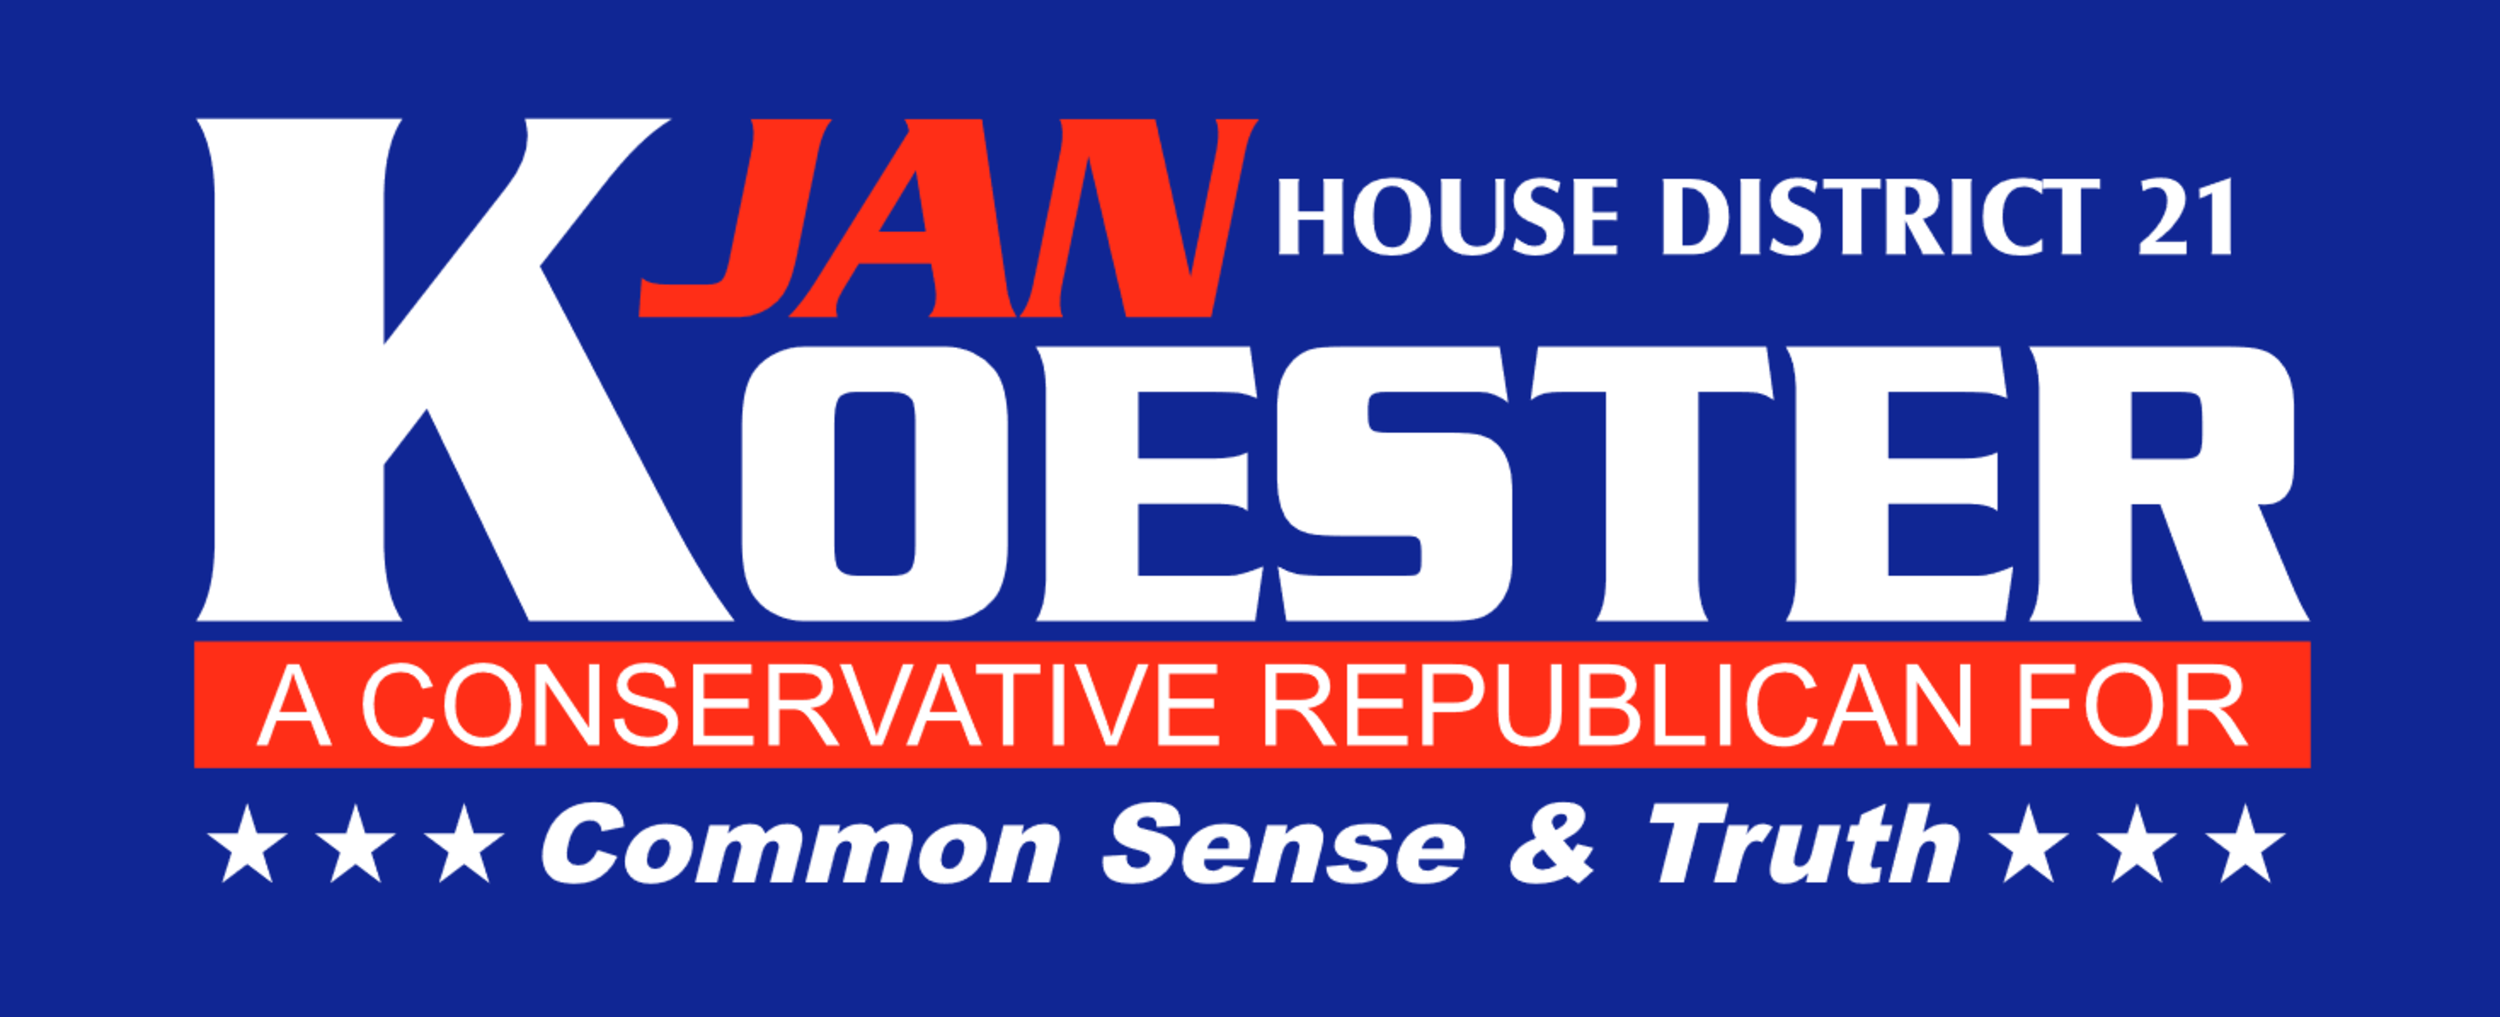 Jan Koester House District 21 - A Conservative Republican for Common Sense & Truth